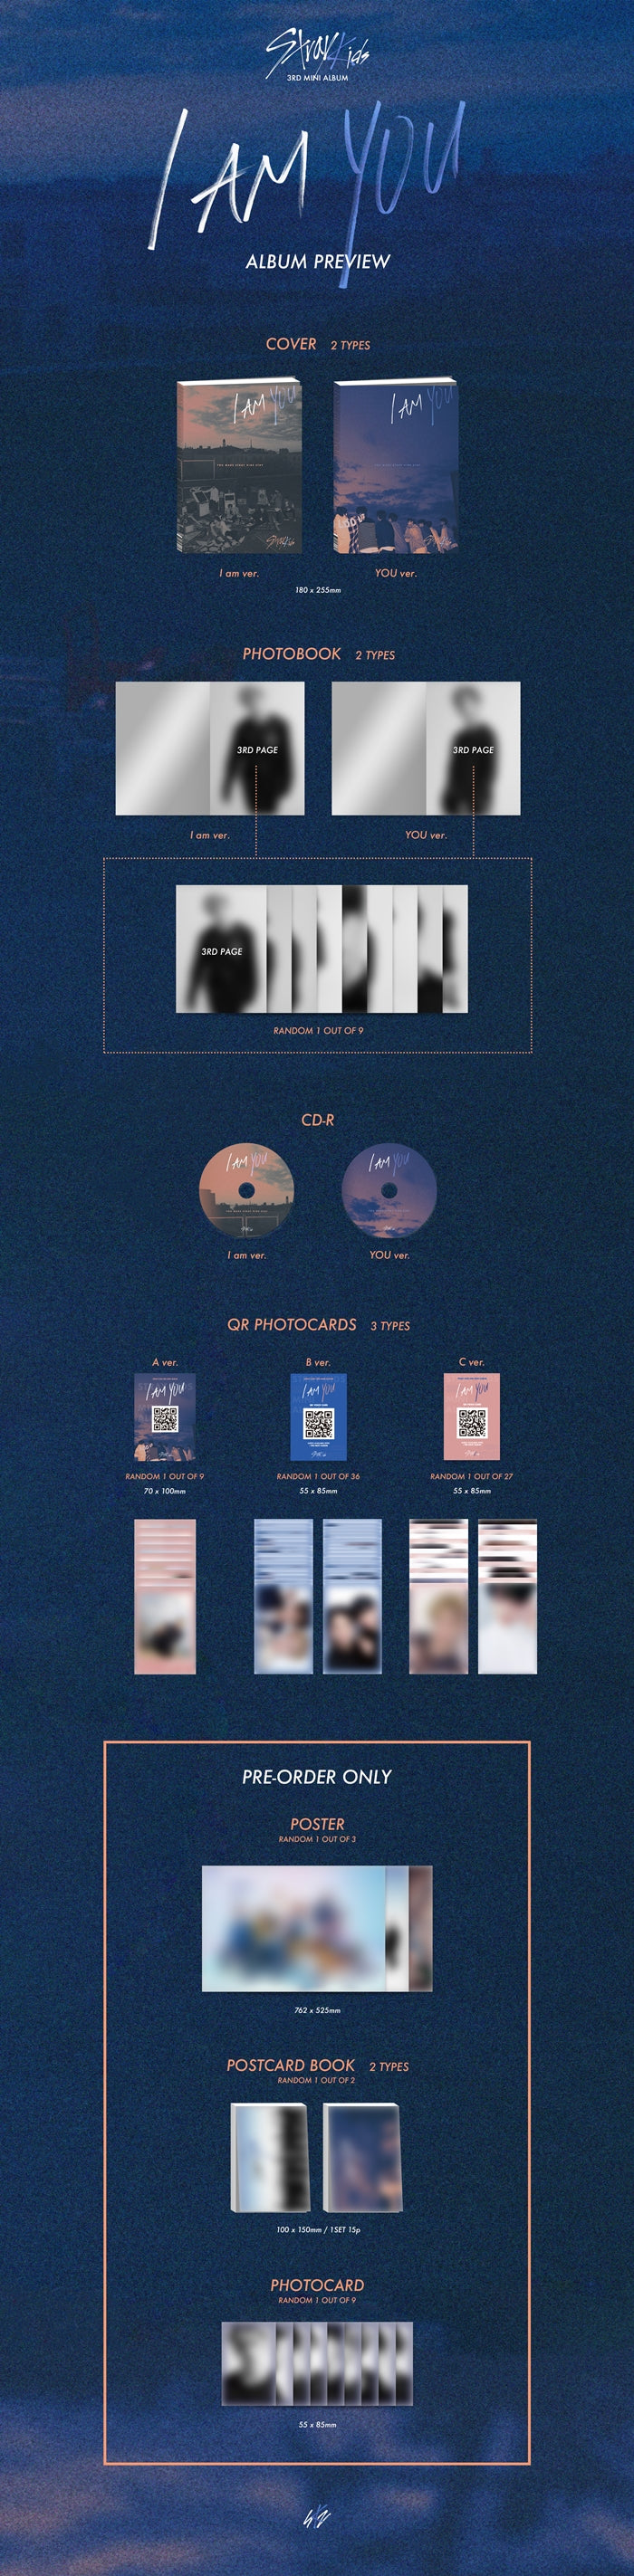 1 CD
1 Photobook
3 QR Photo Cards (3 types, random out of 9, 36, and 27 types respectively)